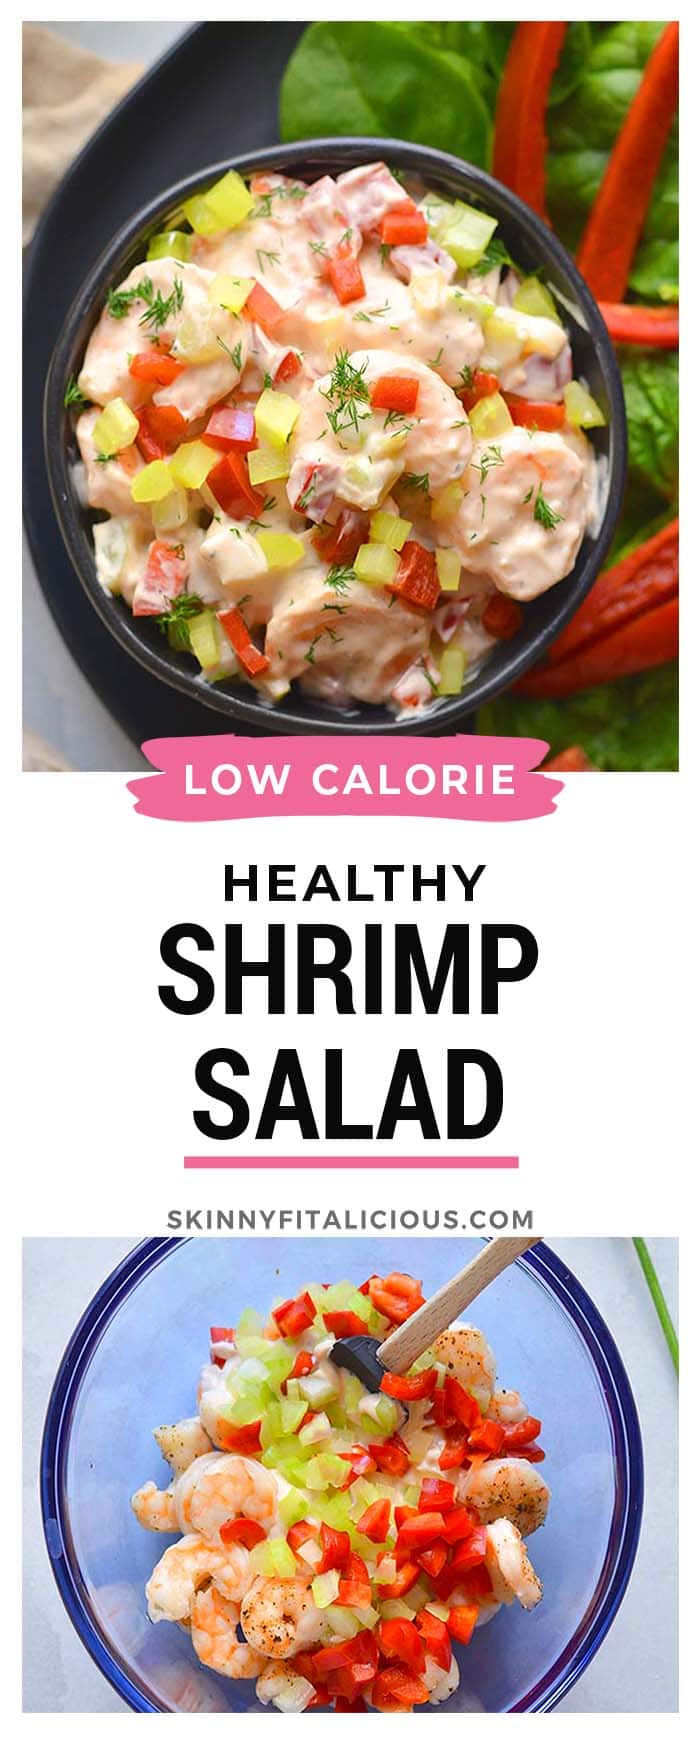 Healthy Greek Yogurt Shrimp Salad is a low calorie, low carb, high protein salad bursting with delicious flavor. A quick lunch or dinner to meal prep for an easy meal that's ready to eat!